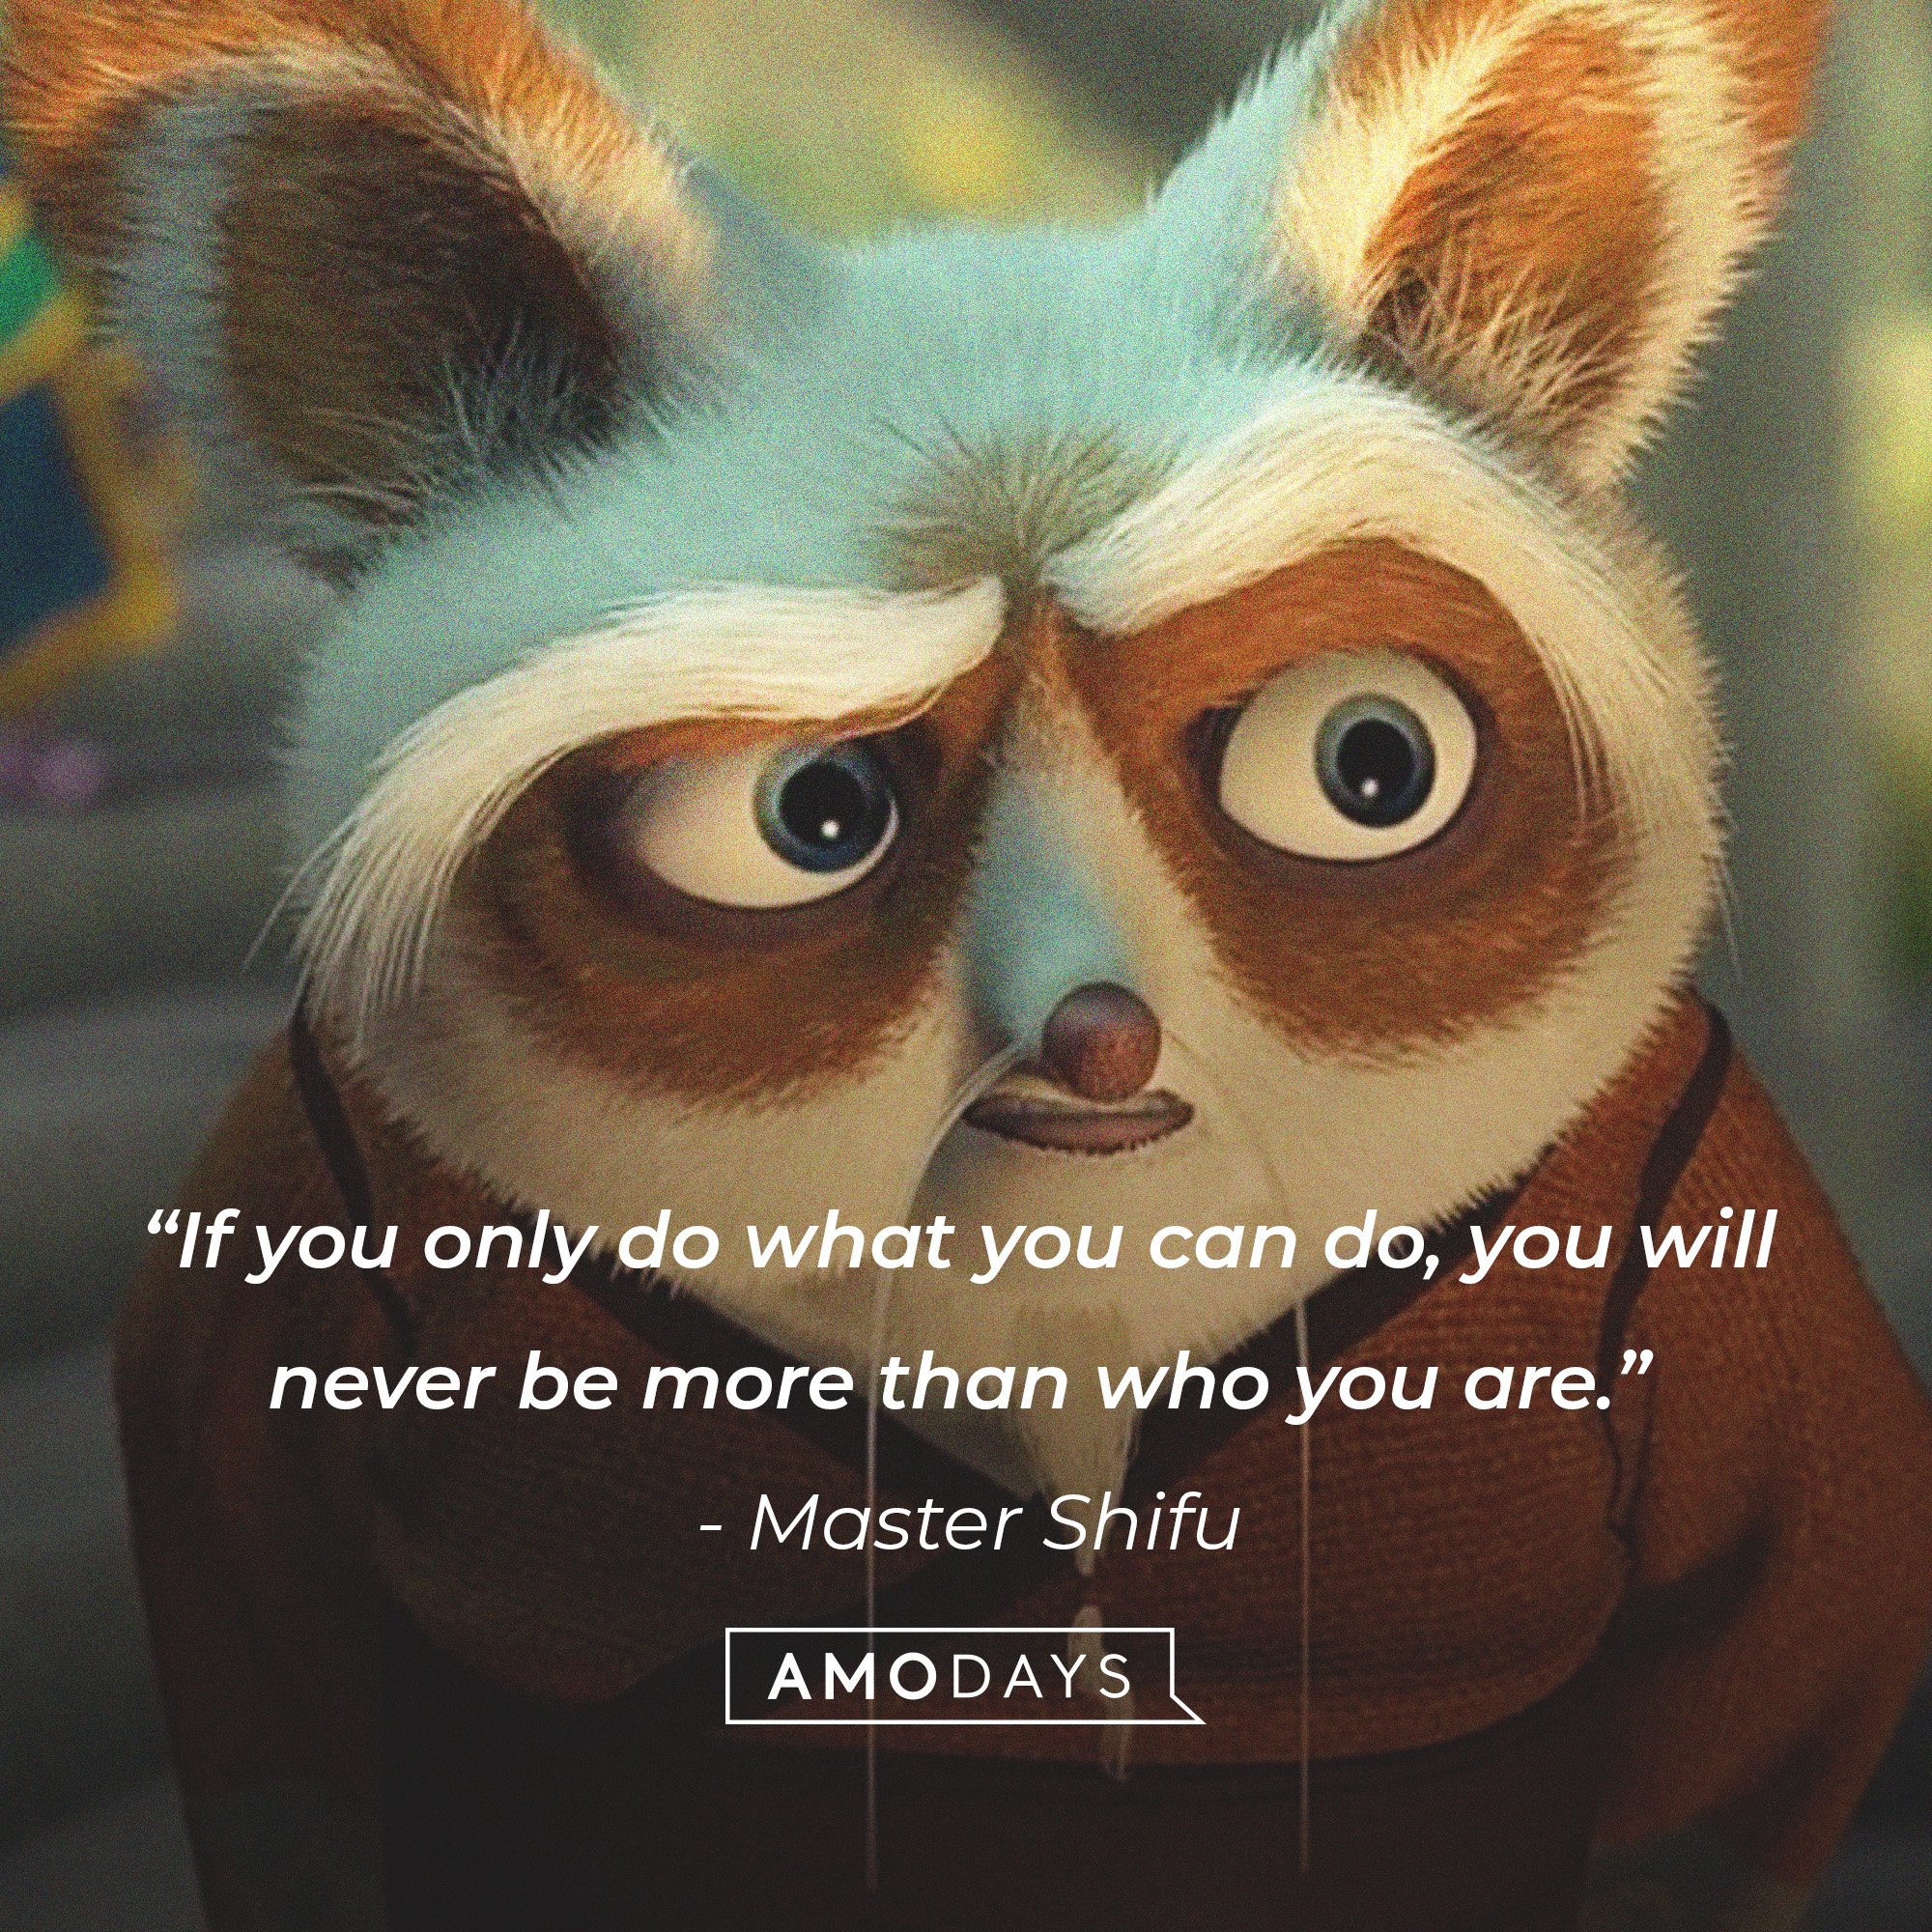  Master Shifu’s quote: “If you only do what you can do, you will never be more than who you are.” | Image: AmoDays